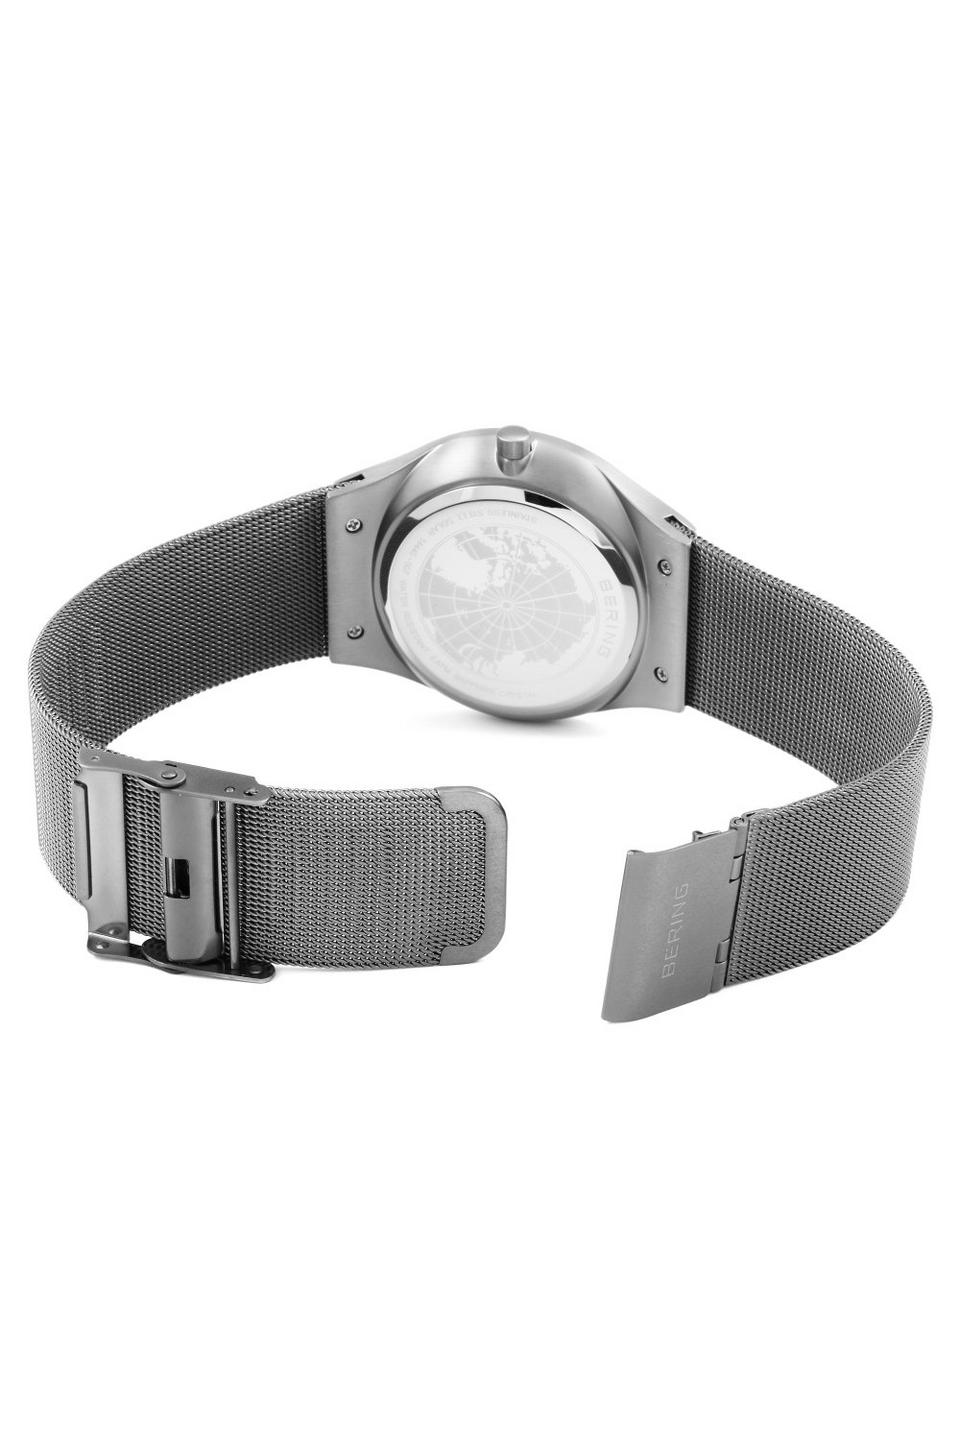 Watches | Slim Solar Stainless Steel Classic Analogue Solar Watch ...